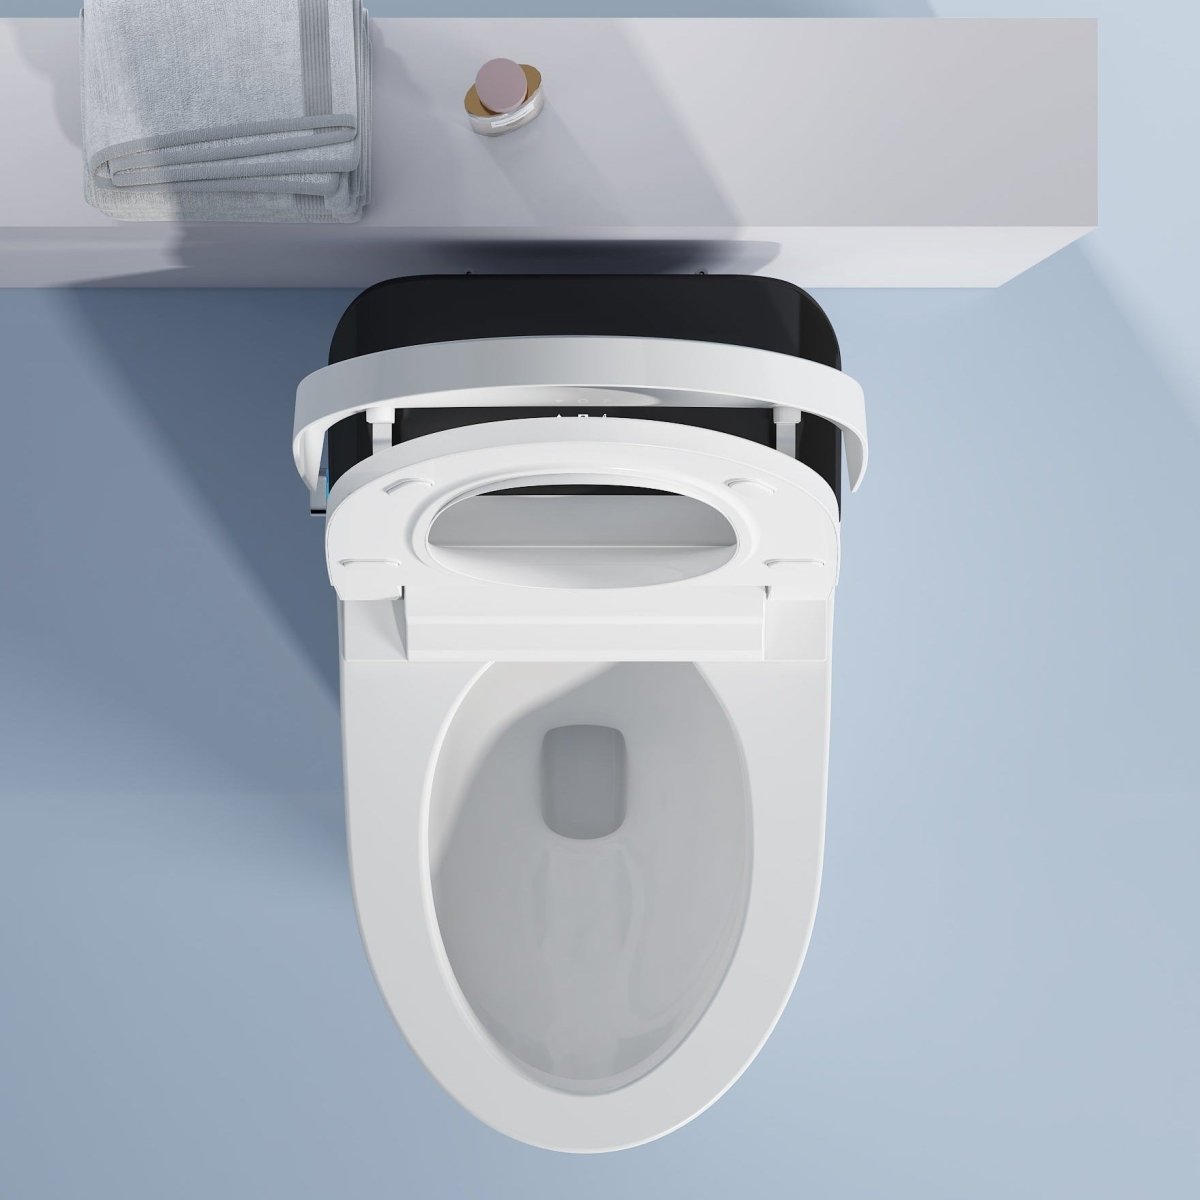 ExBrite Smart Toilet With Auto Flush,Foot Sensor Flush,Heated Seat,Warm Water,Warm Air Drying,Remote Control